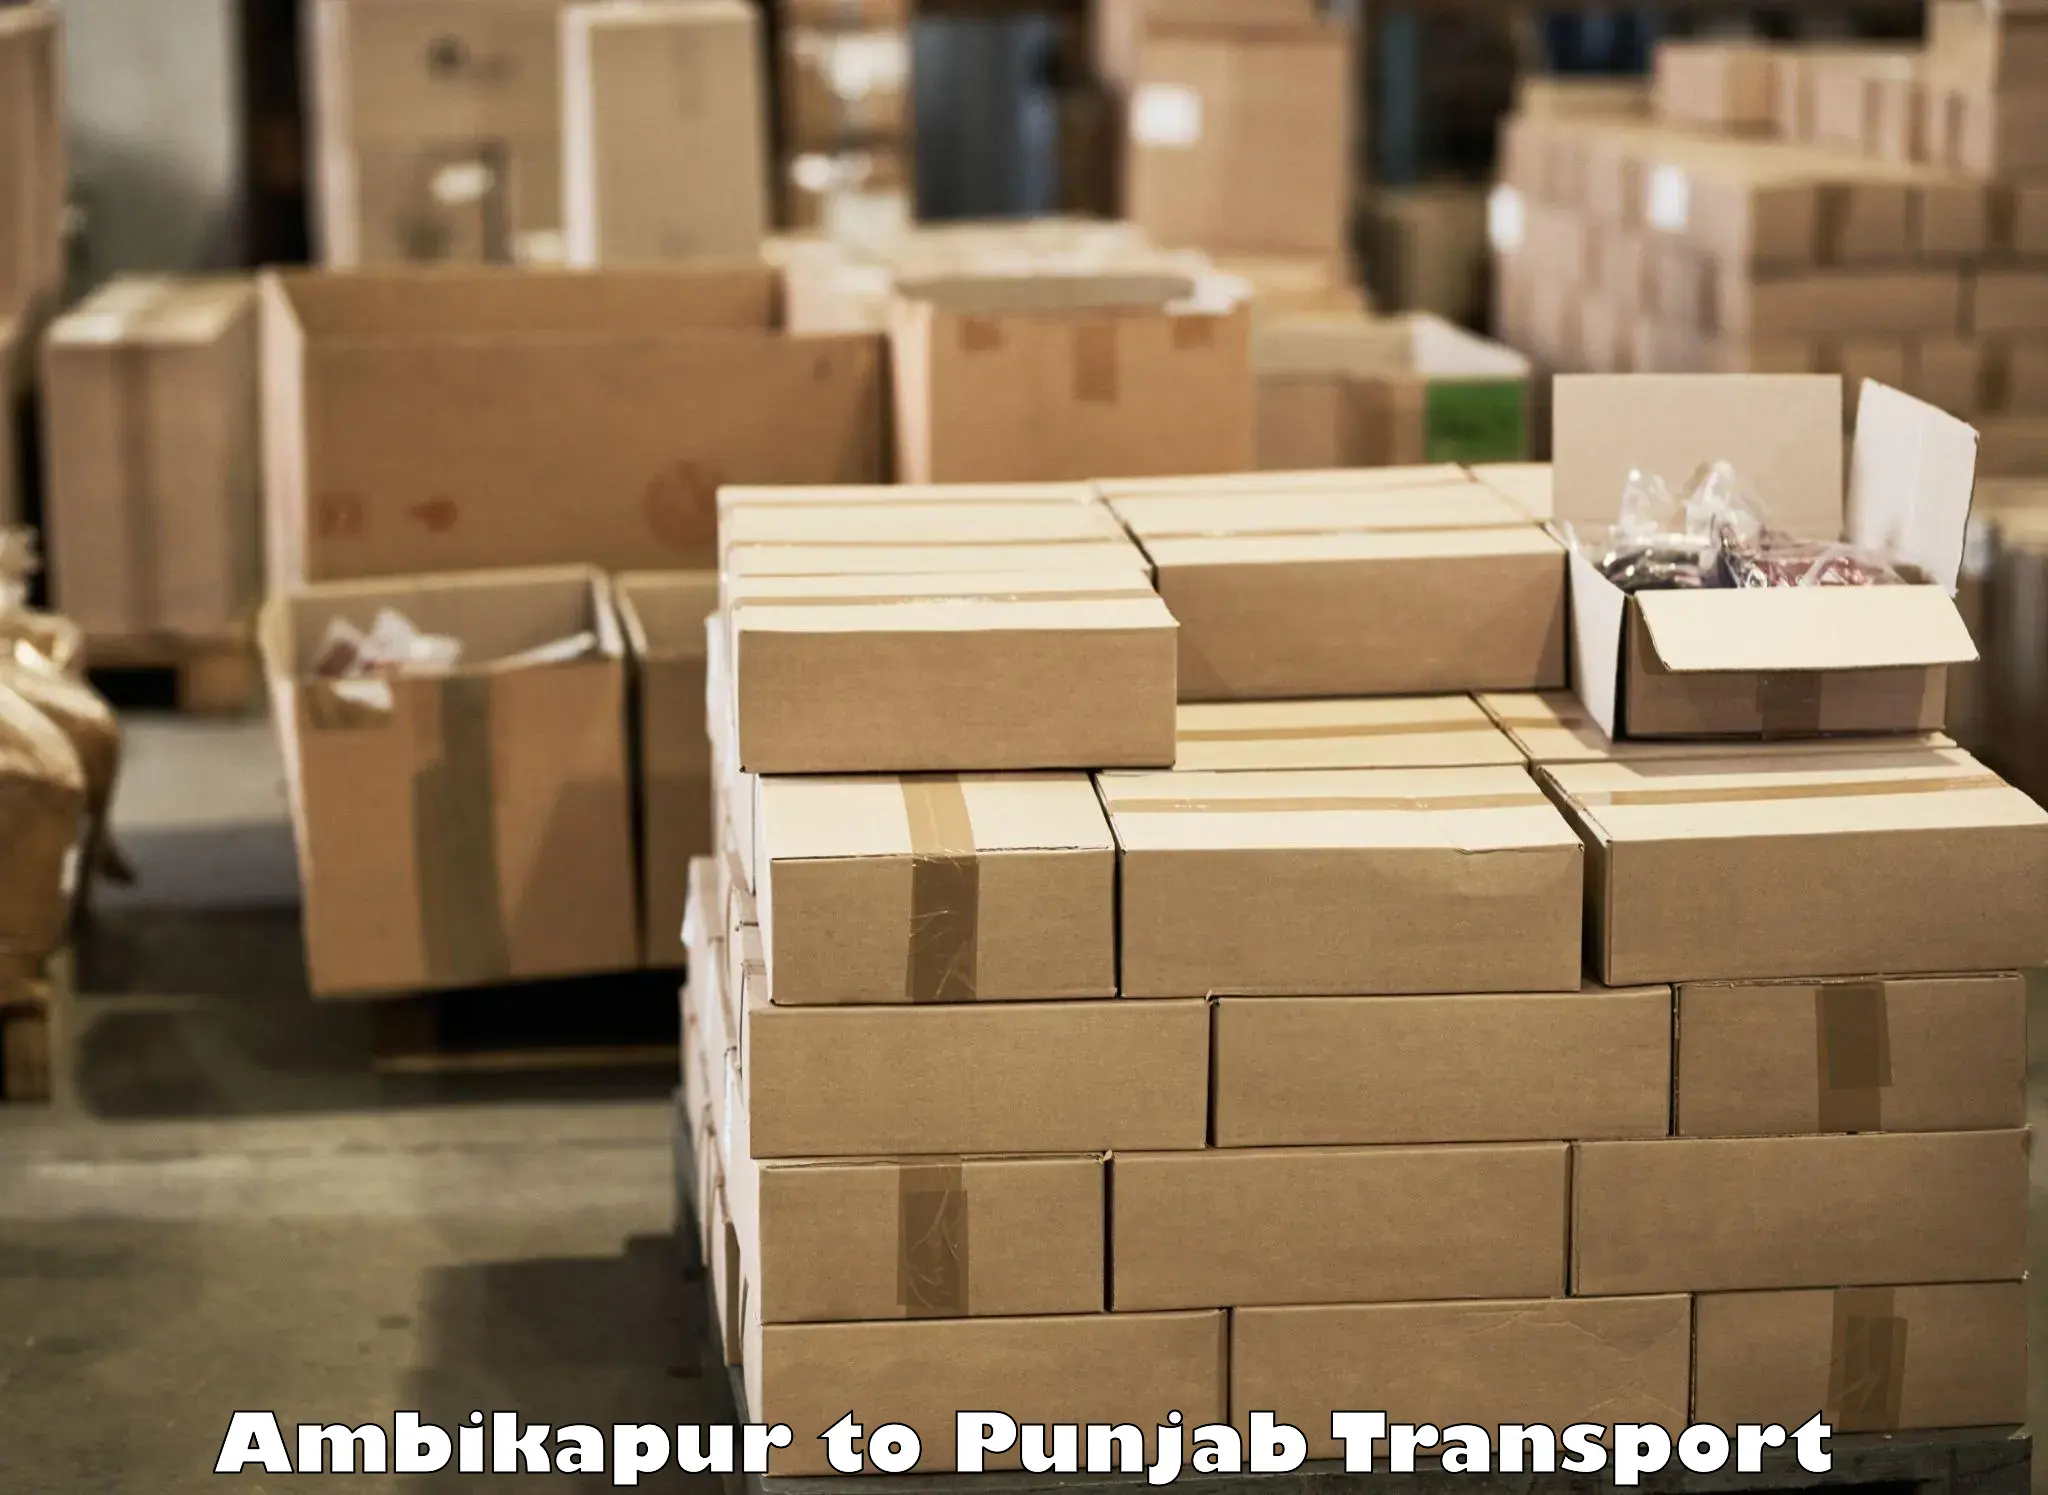 Truck transport companies in India Ambikapur to Jalandhar